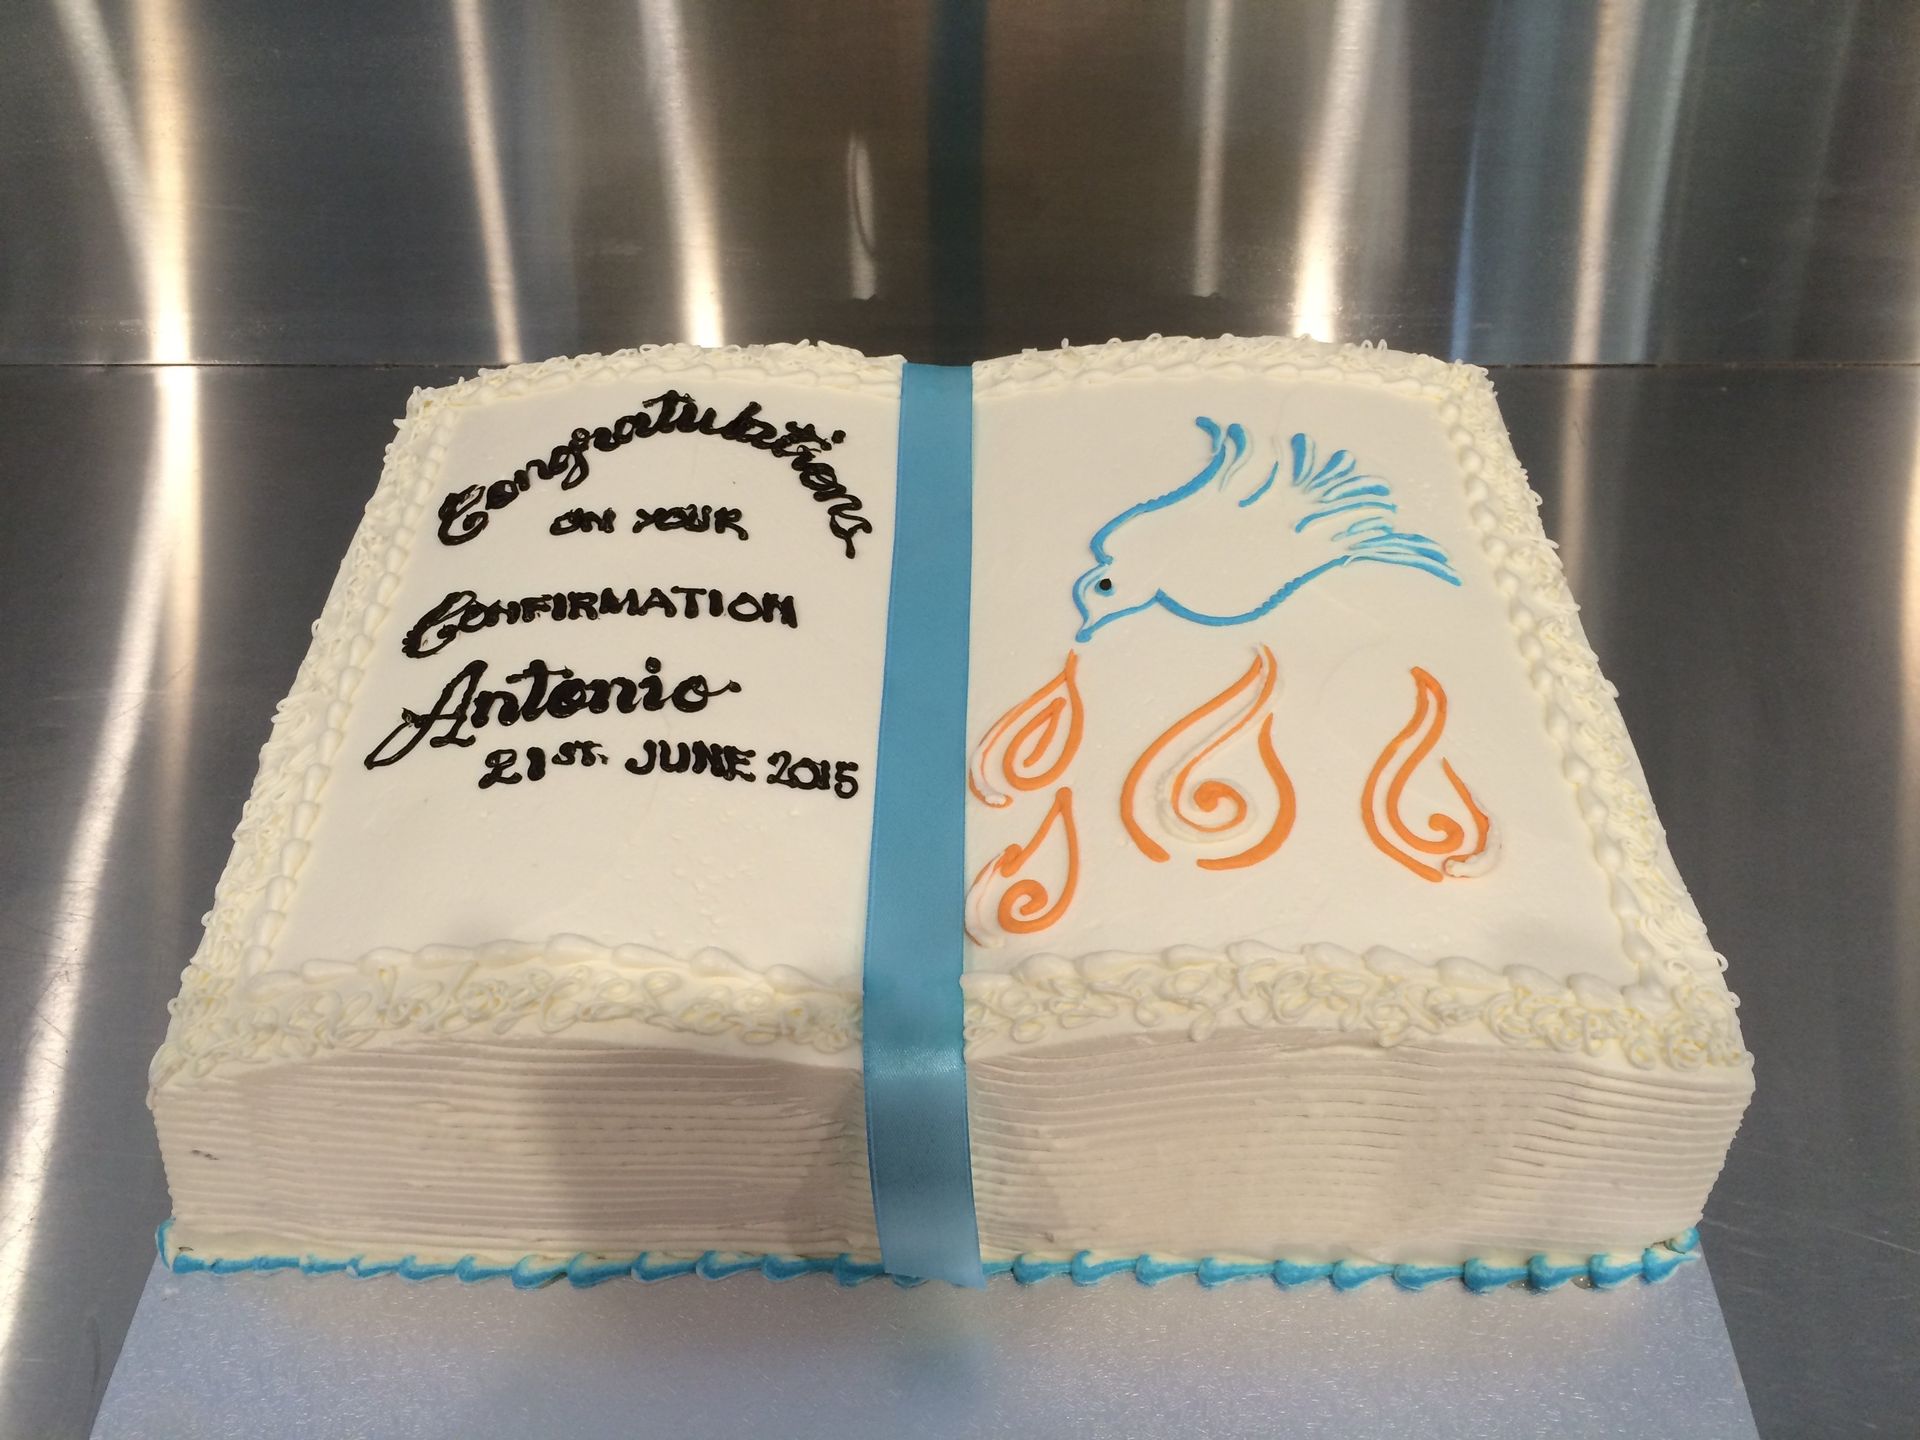 white confirmation book cake with blue bird